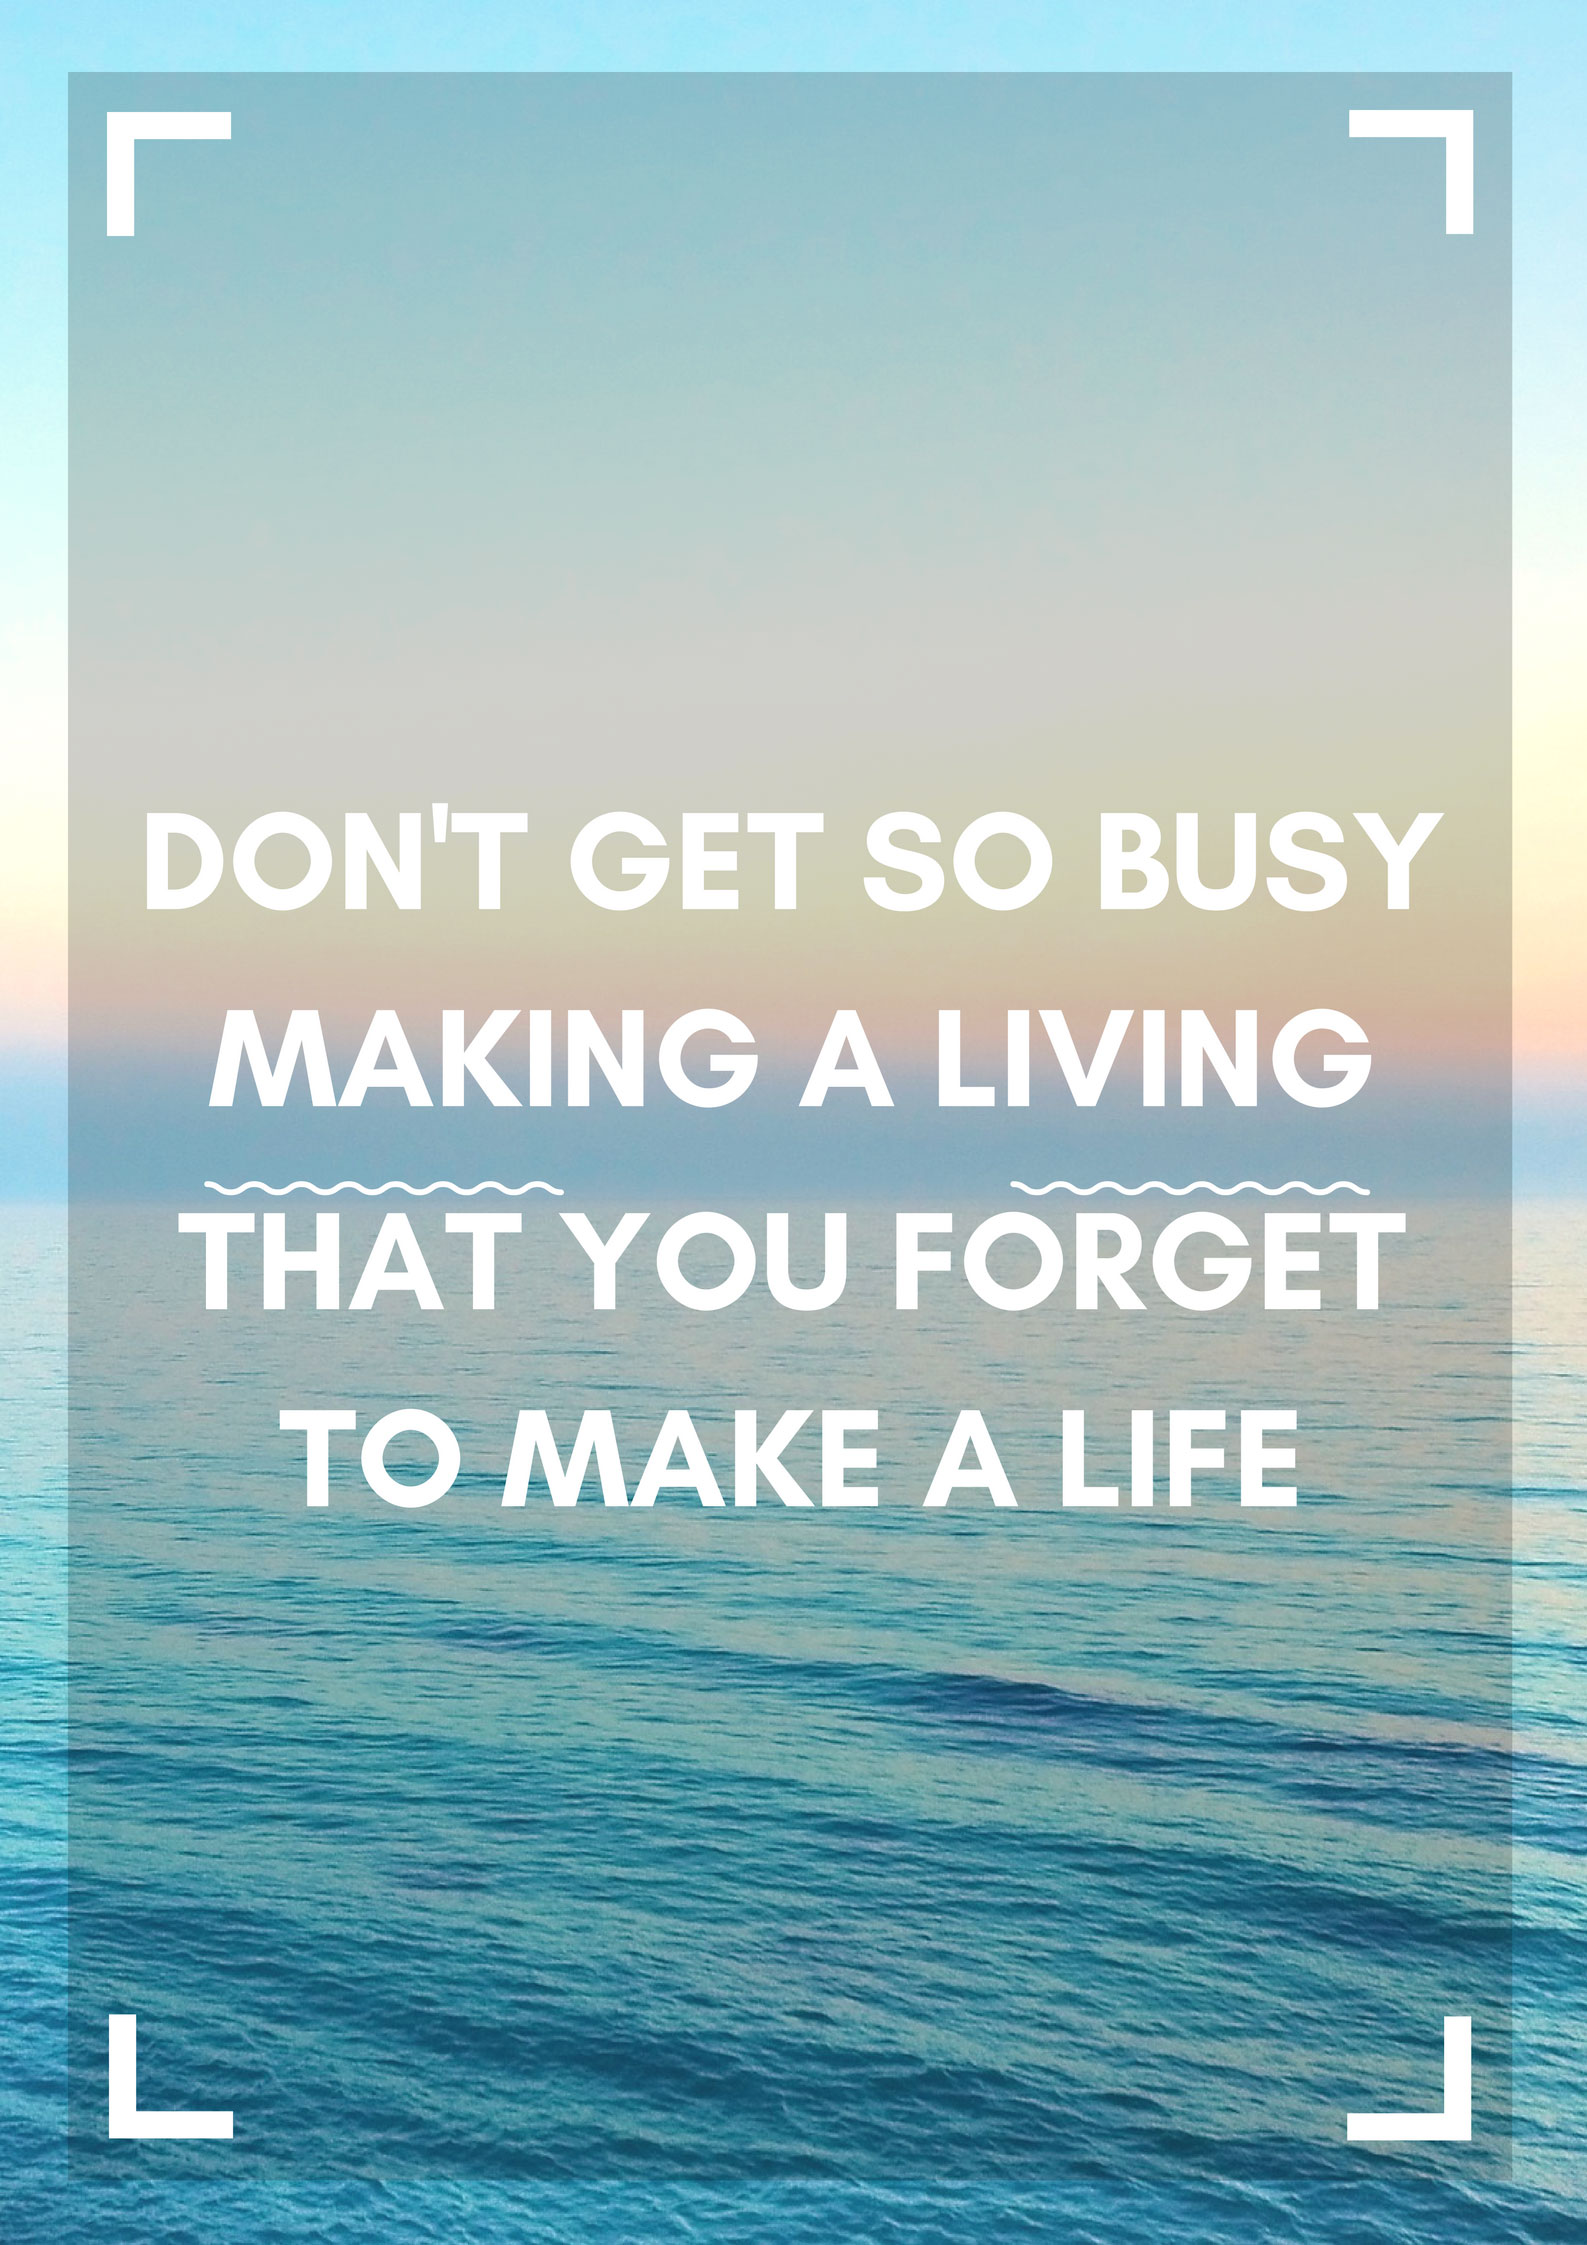 Don’t Get So Busy Making A Living, that you FORGET to Make a Life